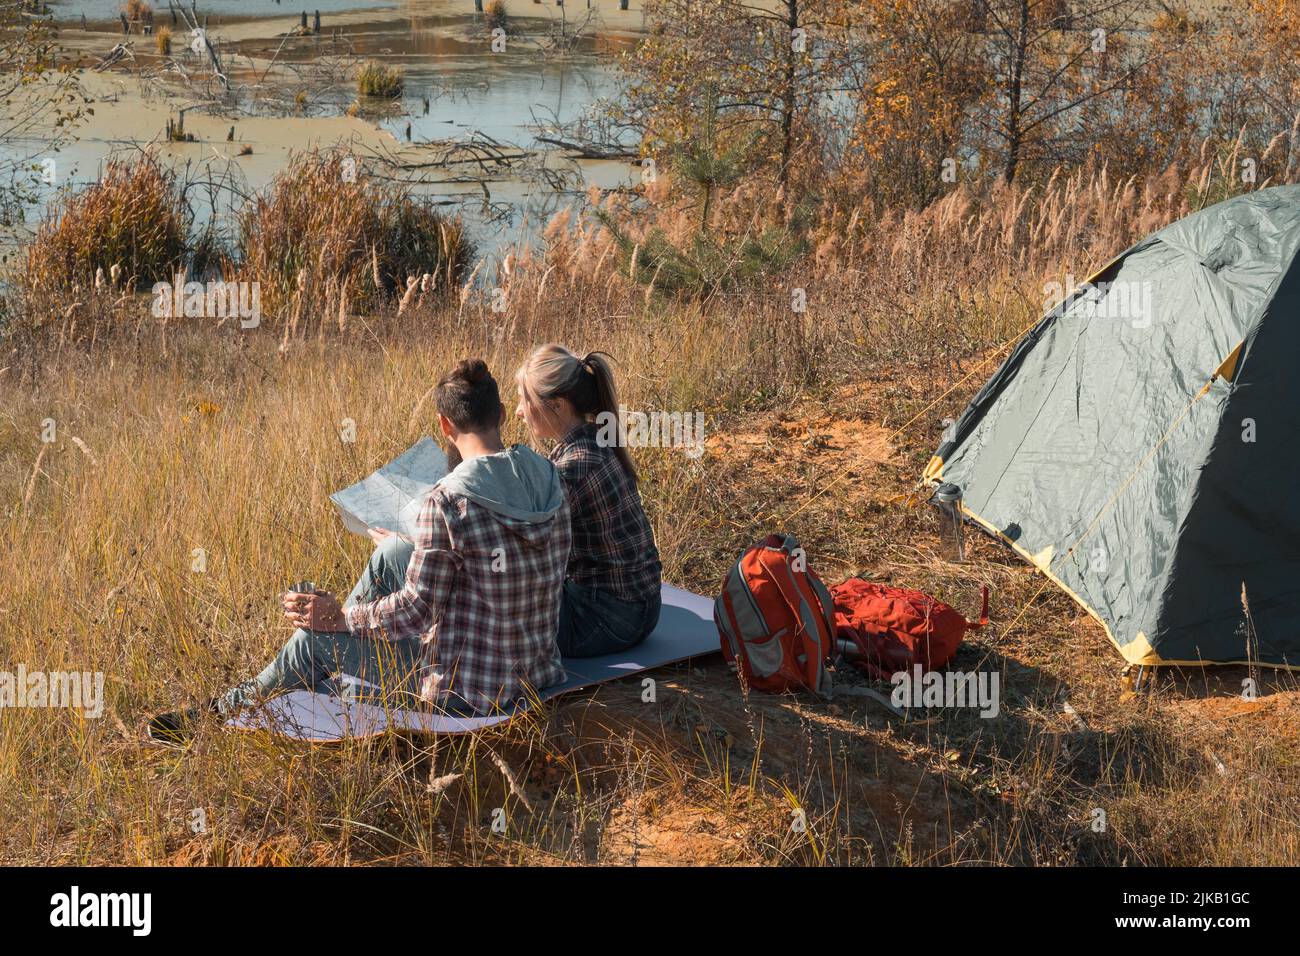 travelers lifestyle couple camping fall nature Stock Photo